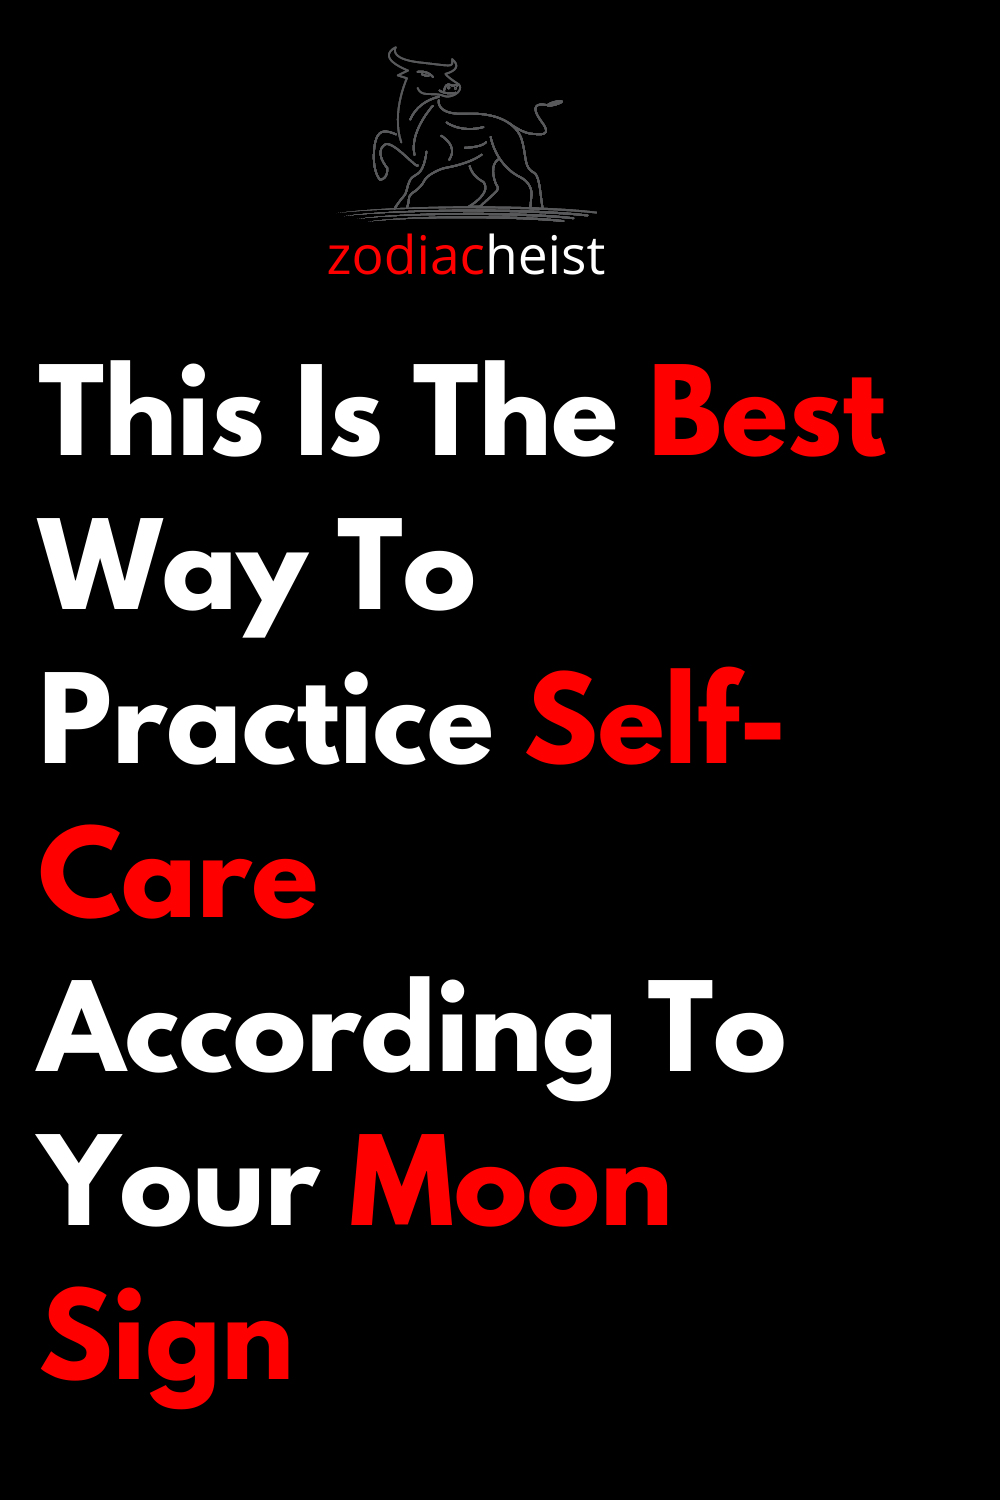 This Is The Best Way To Practice Self-Care According To Your Moon Sign